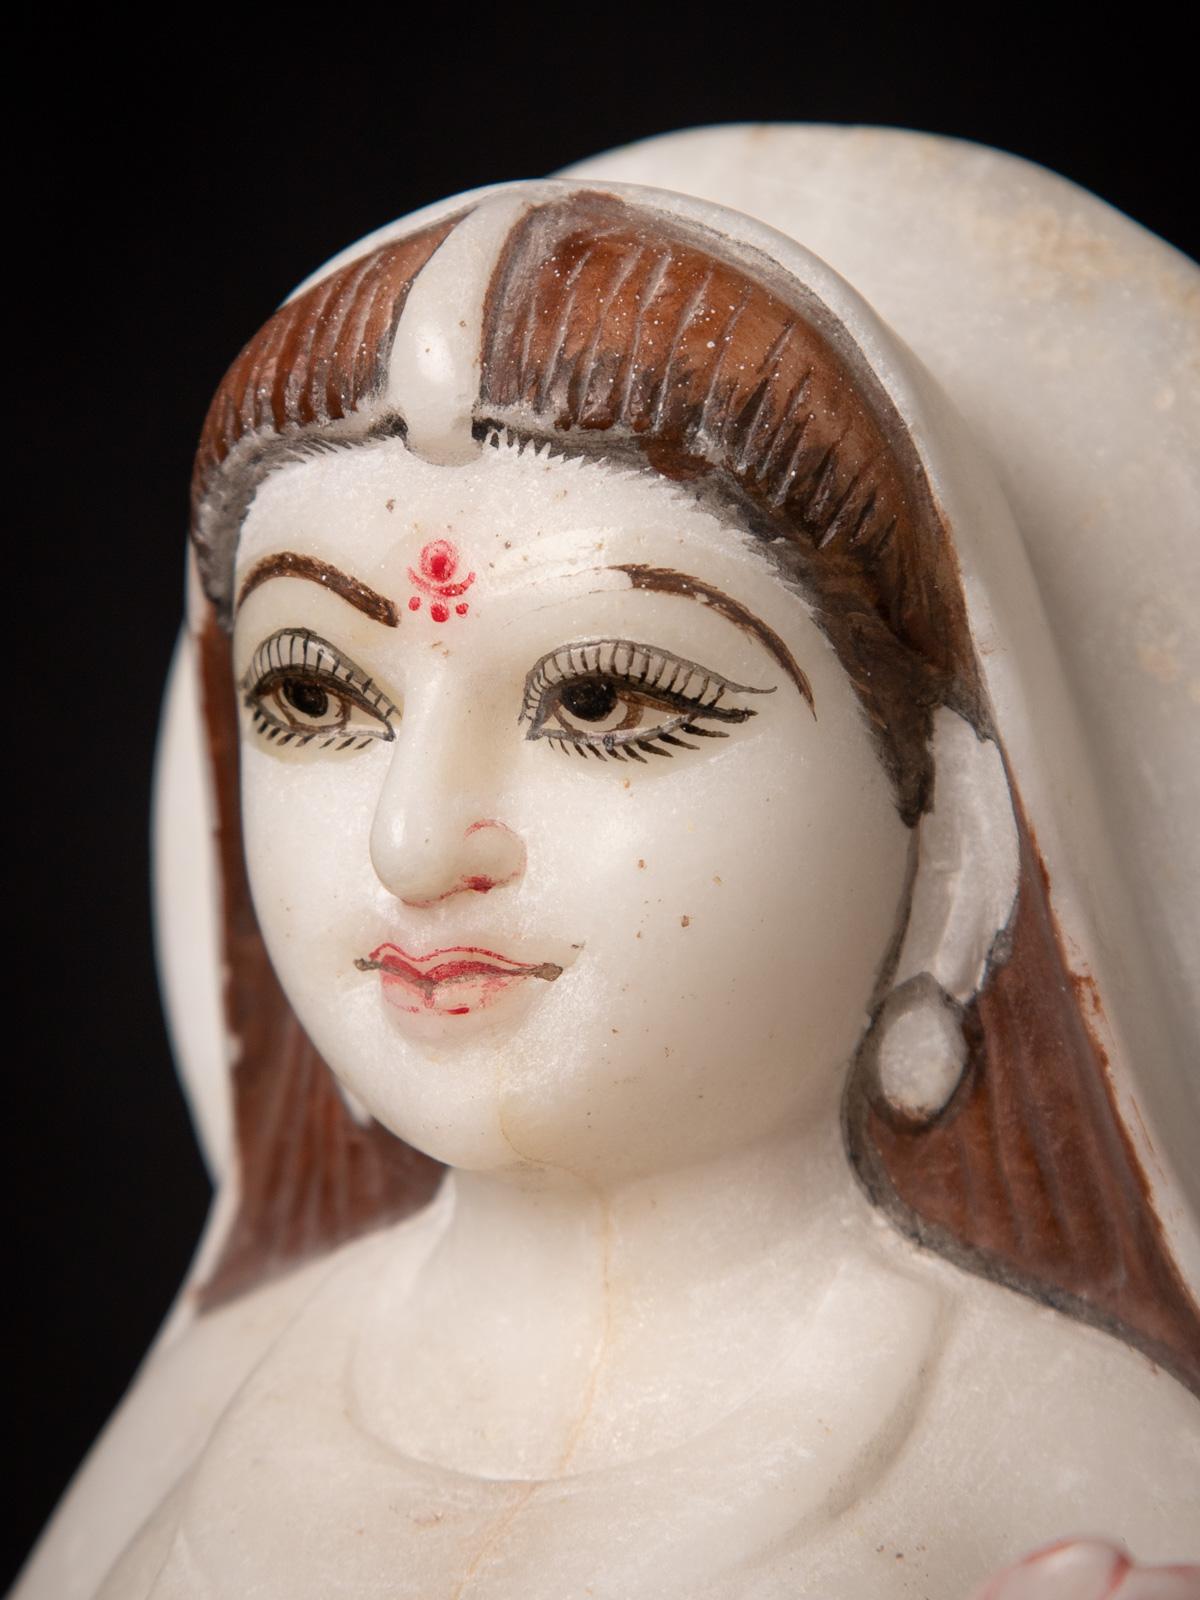 Middle 20th century Old Indian marble Khodiyar mata statue from India  5